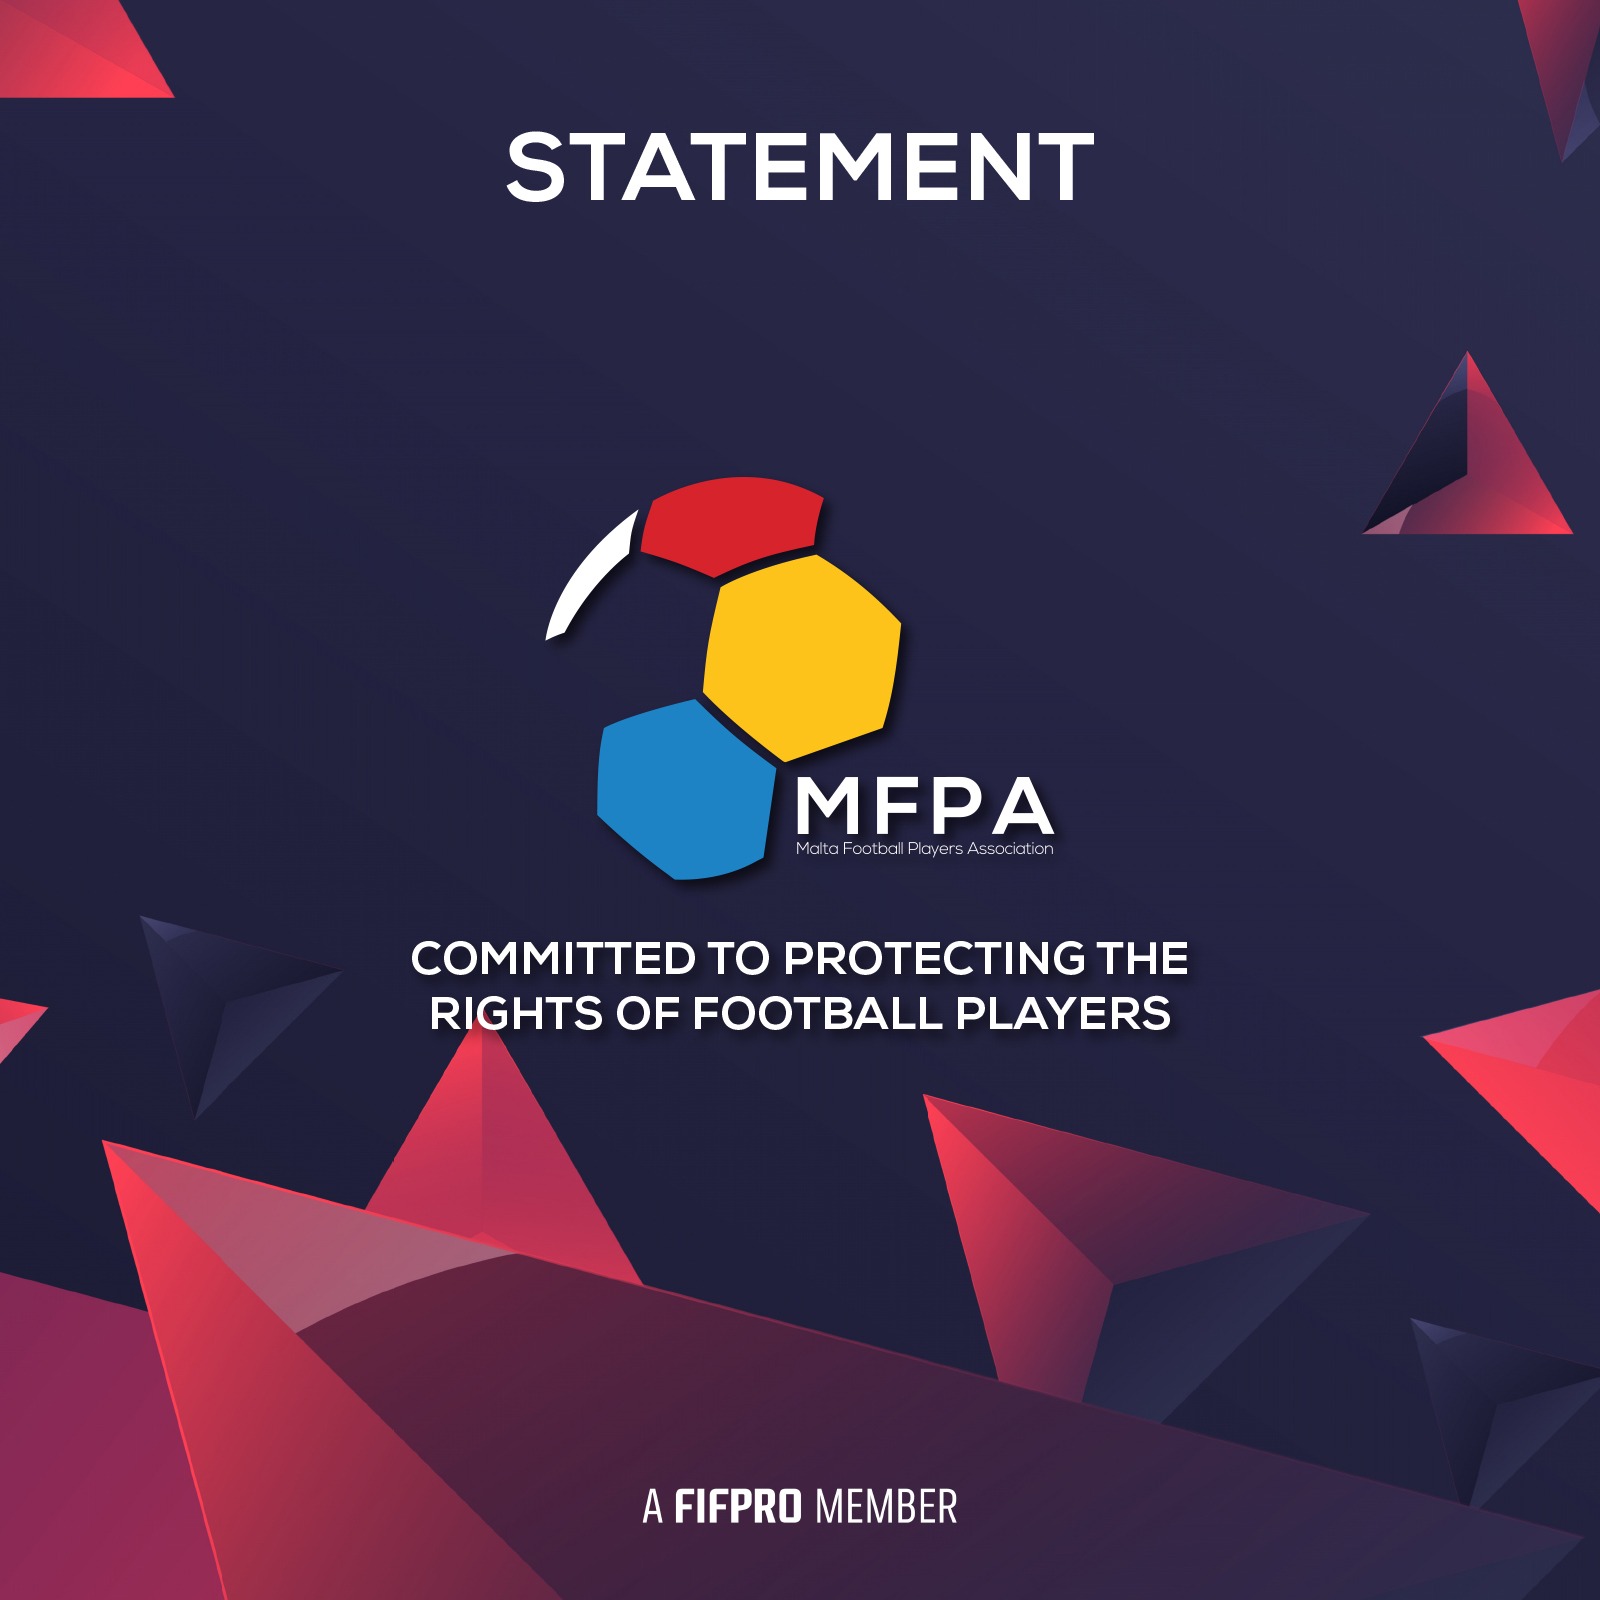 MFPA assisting players over unpaid wages